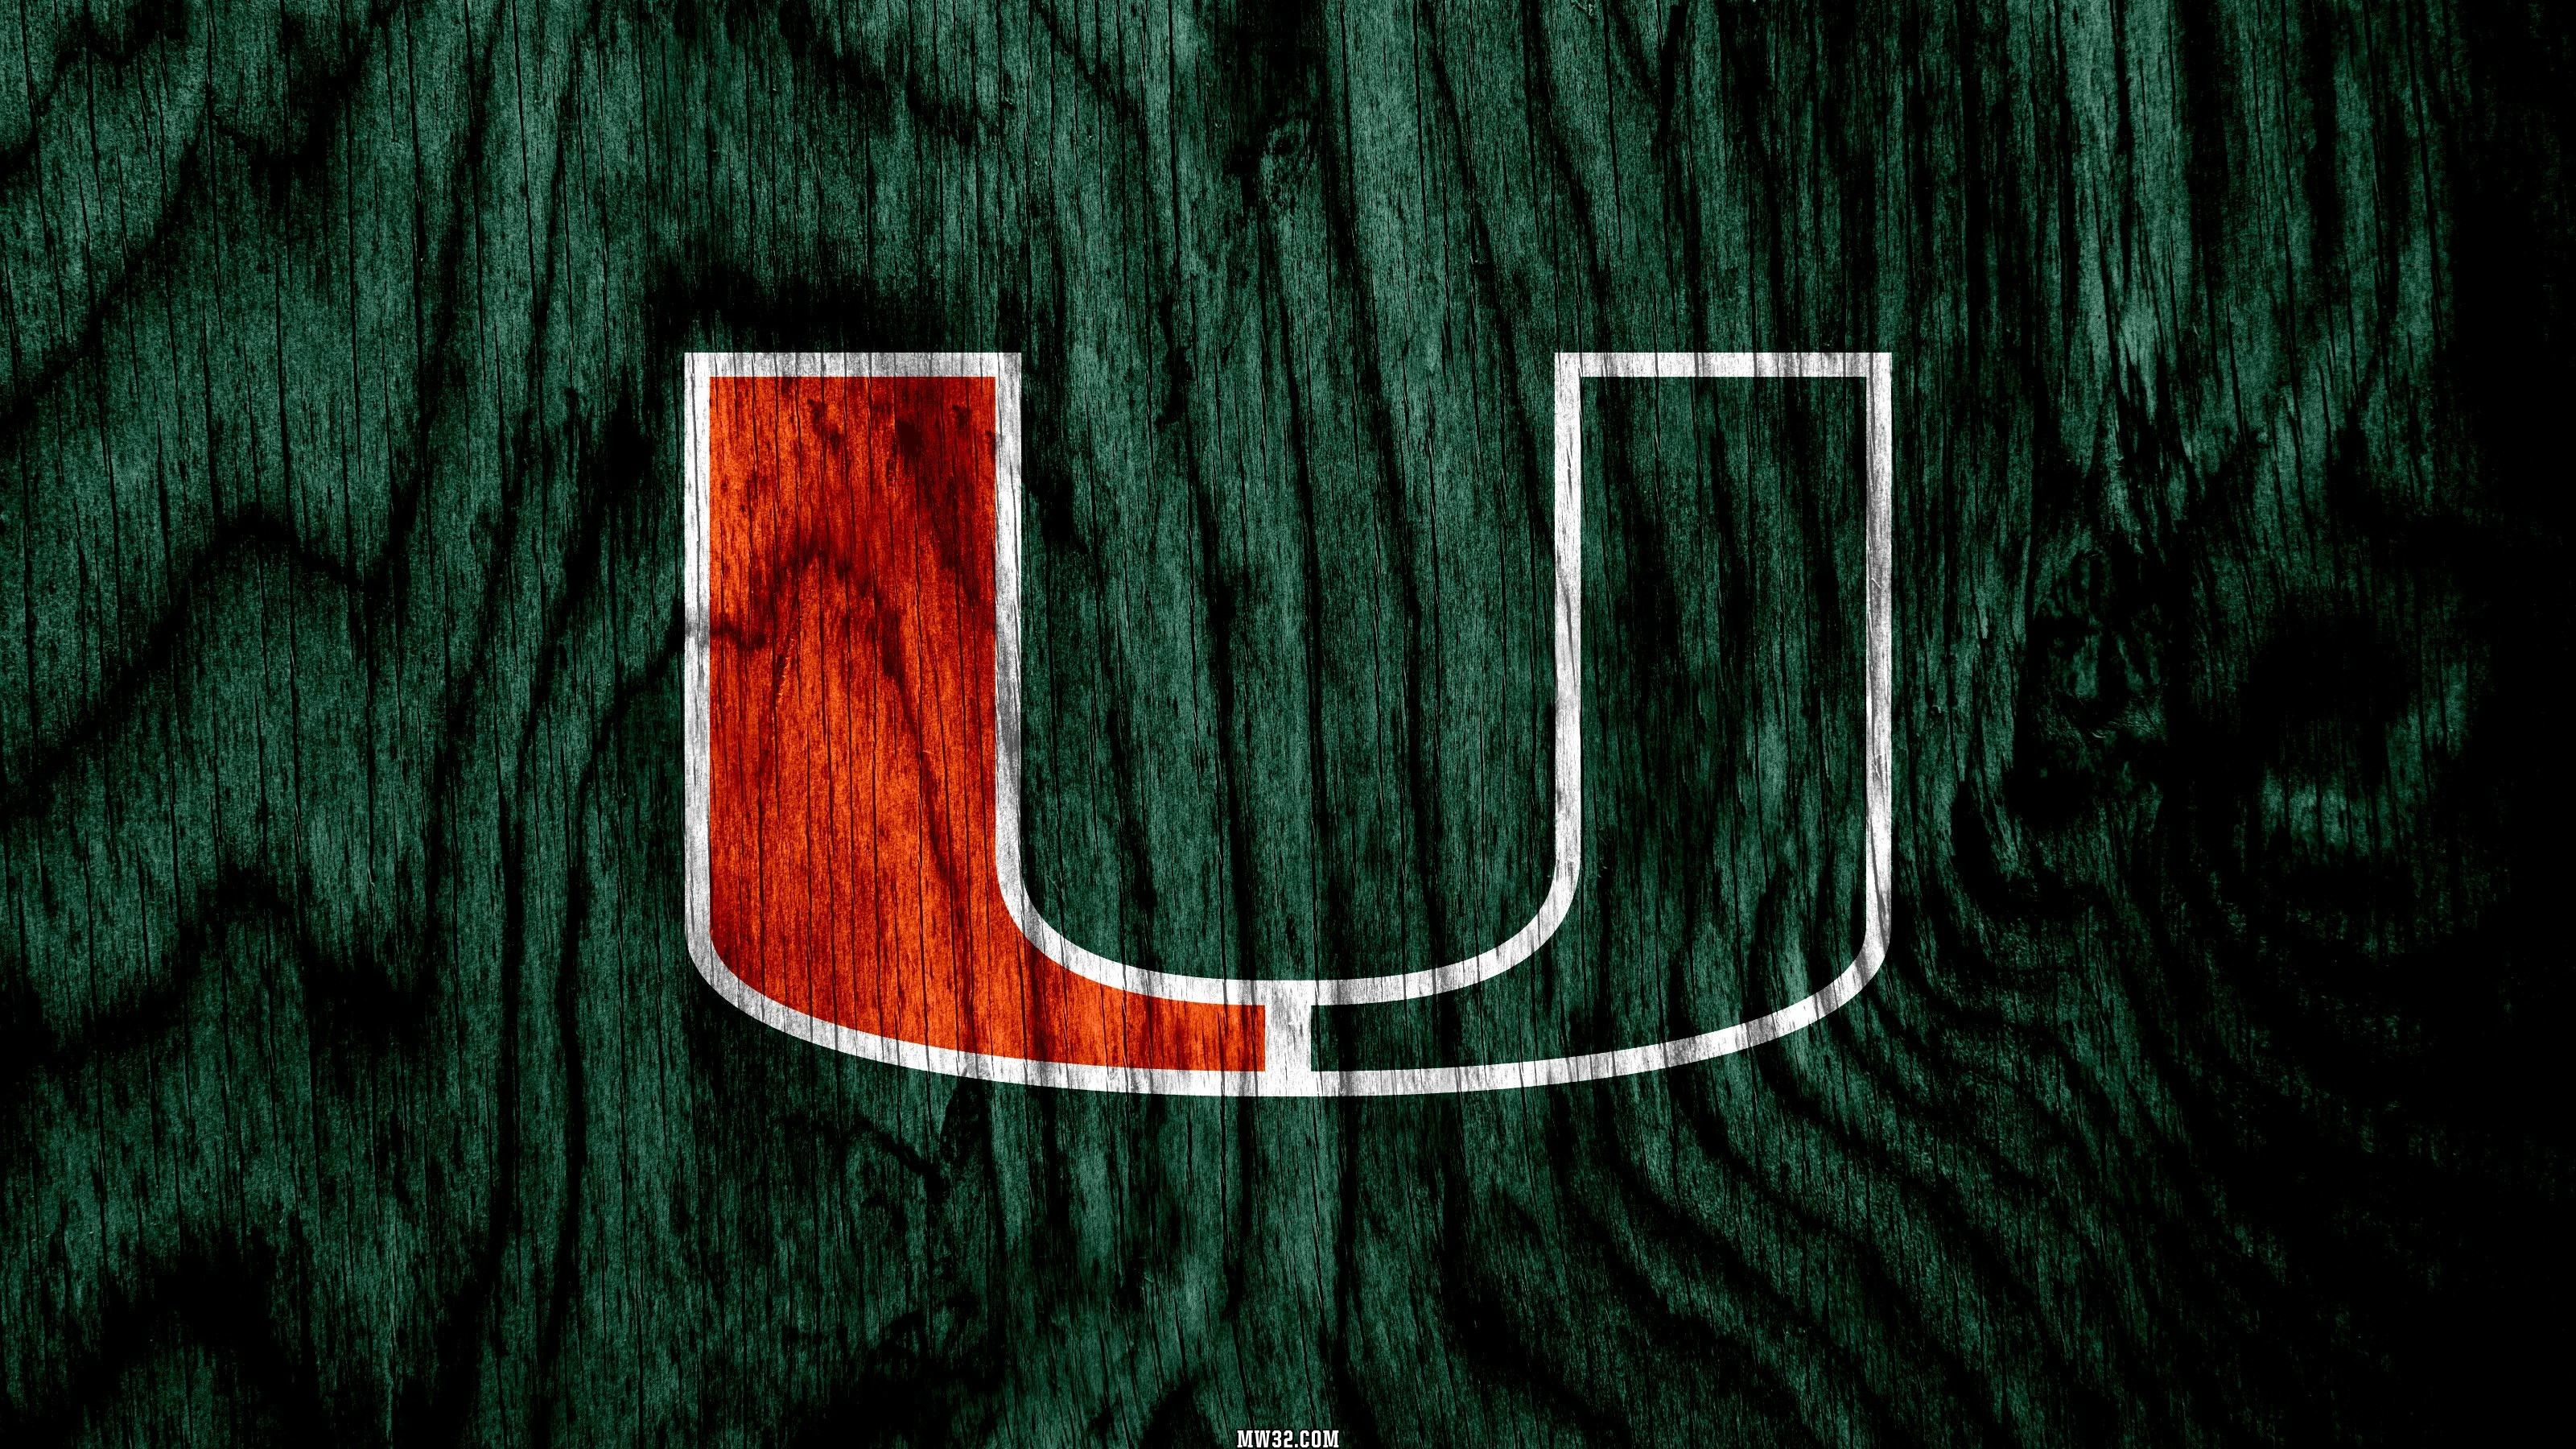 Miami Hurricanes Iphone Wallpapers